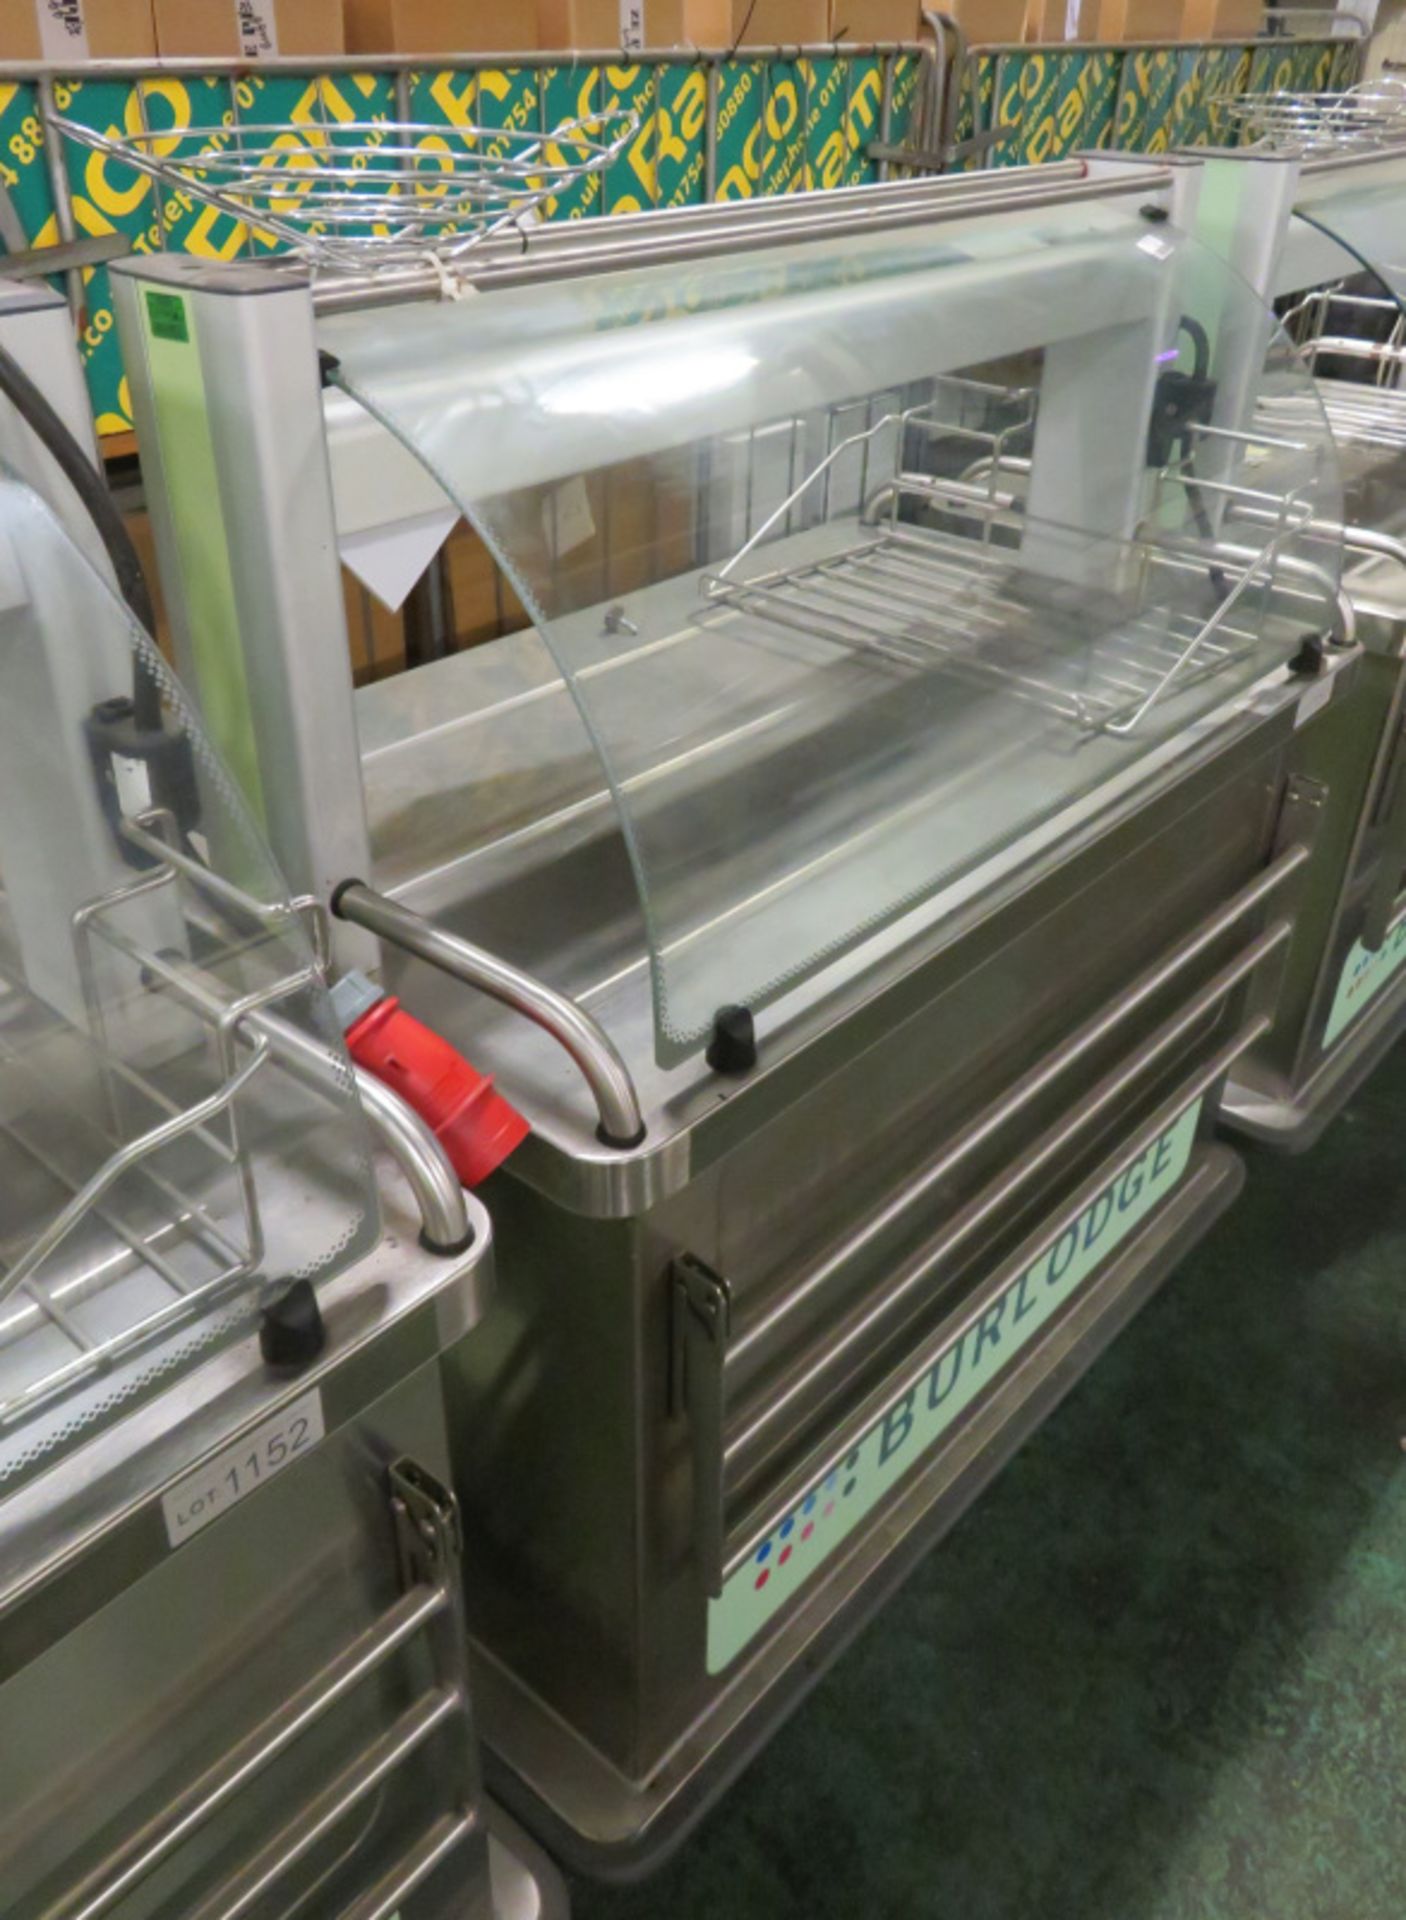 Burlodge Food Servery Trolley Unit - 3 Phase - W 1200mm x D 700mm x H 1400mm - Image 2 of 2